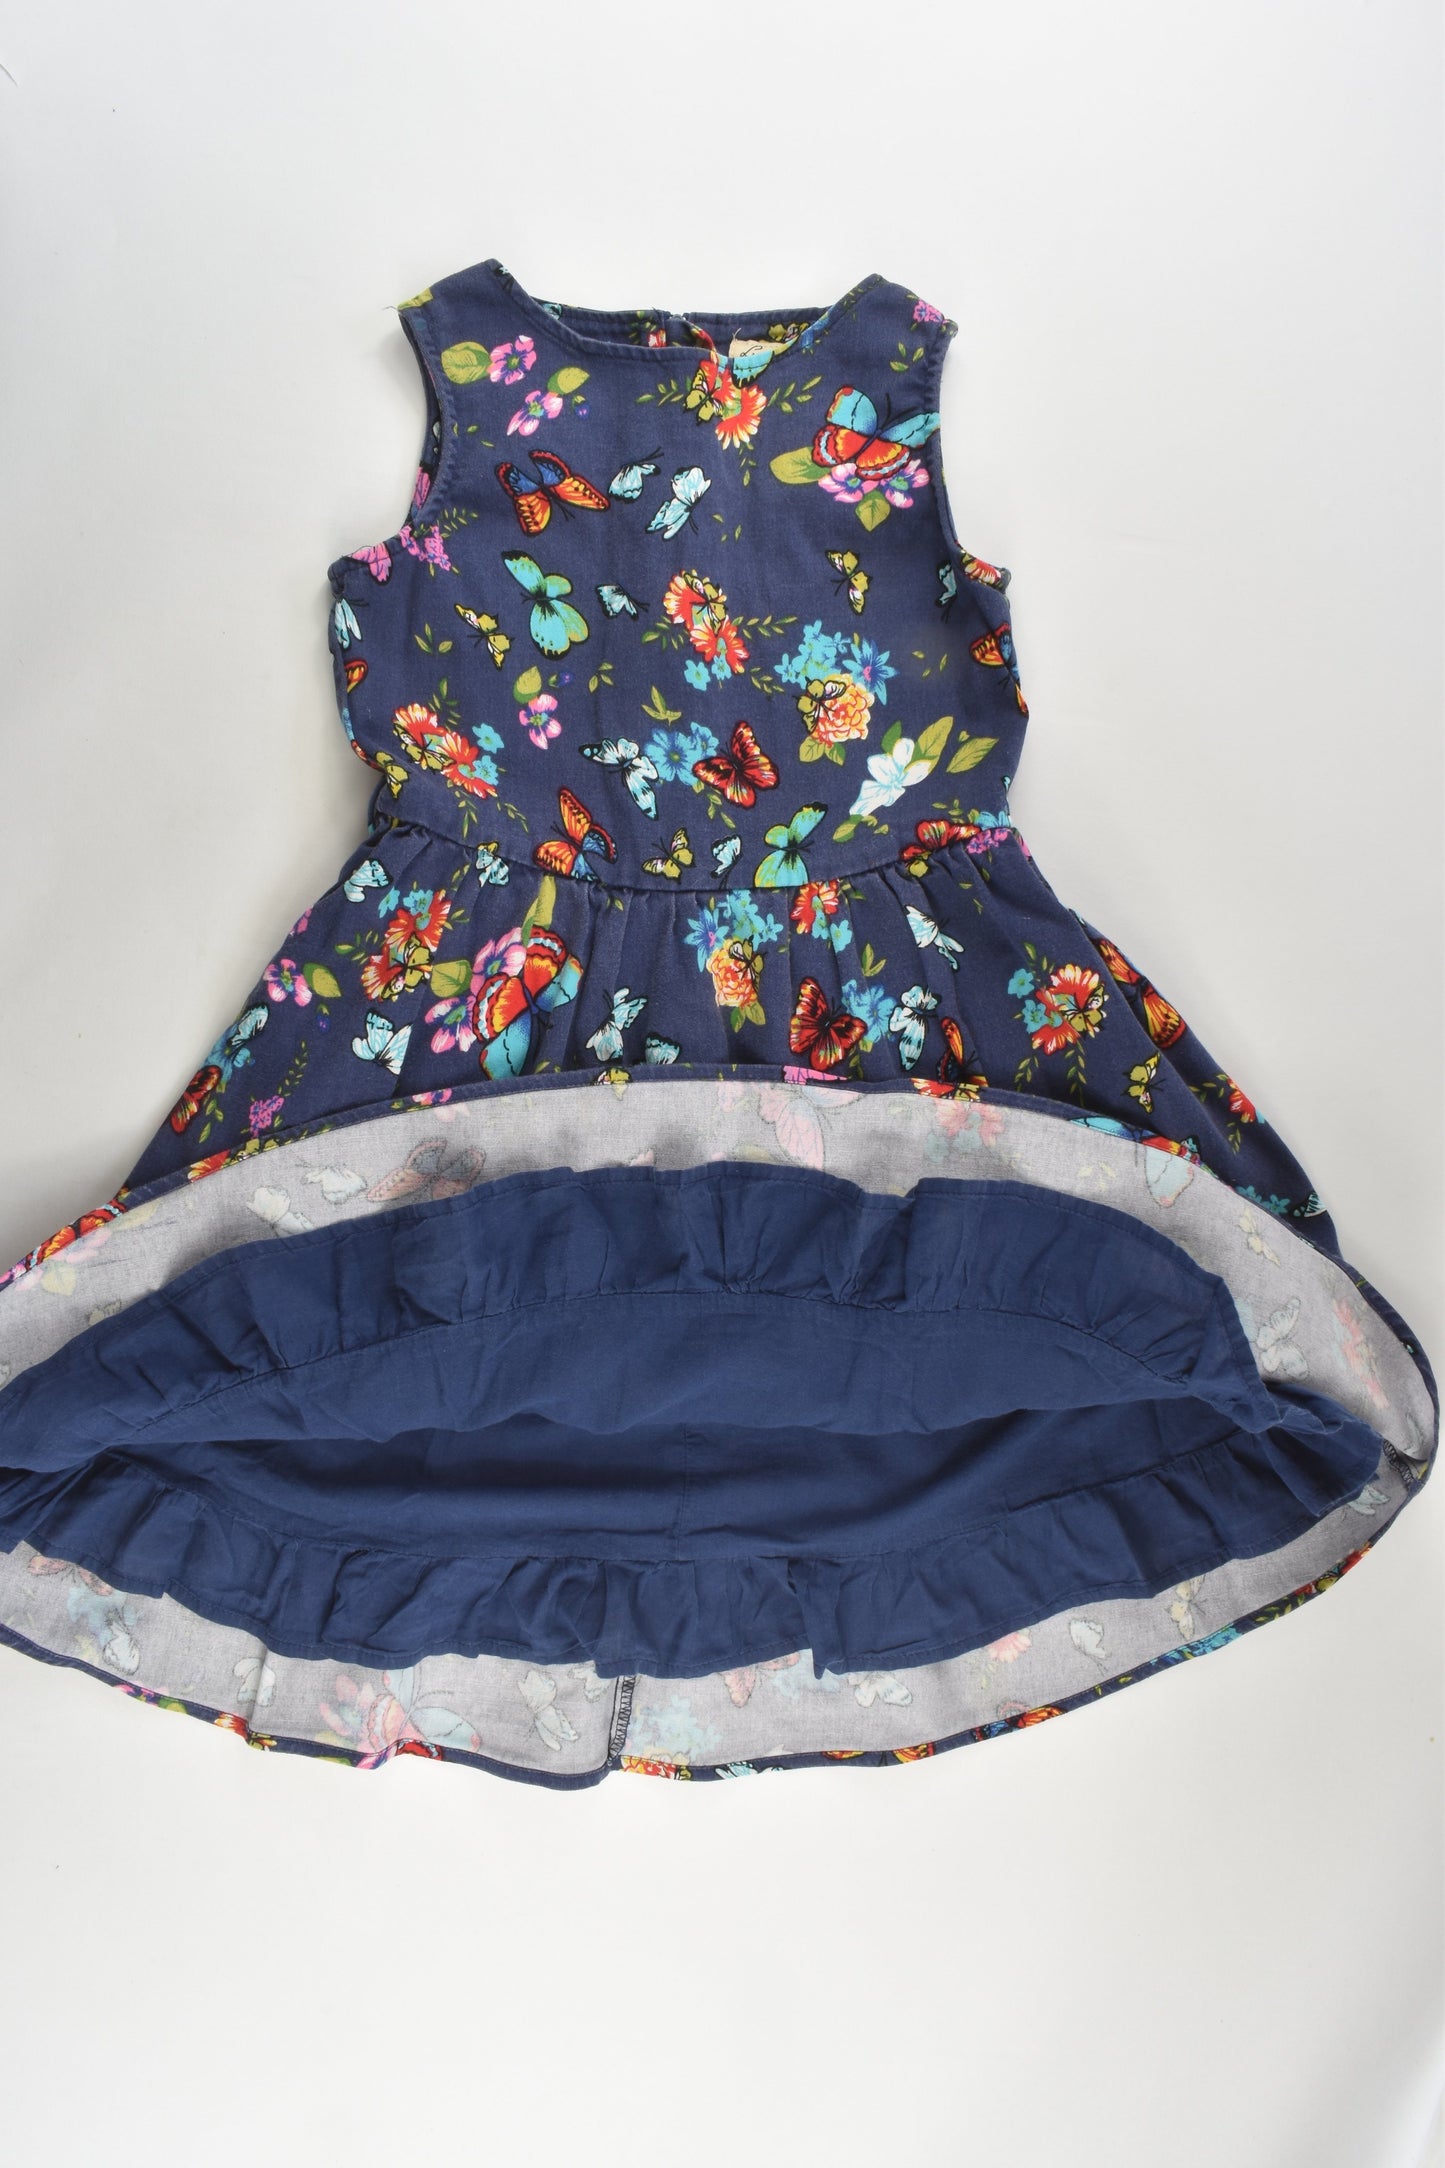 Lindy Bop Size 7-8 Lined Butterflies and Flowers Dress